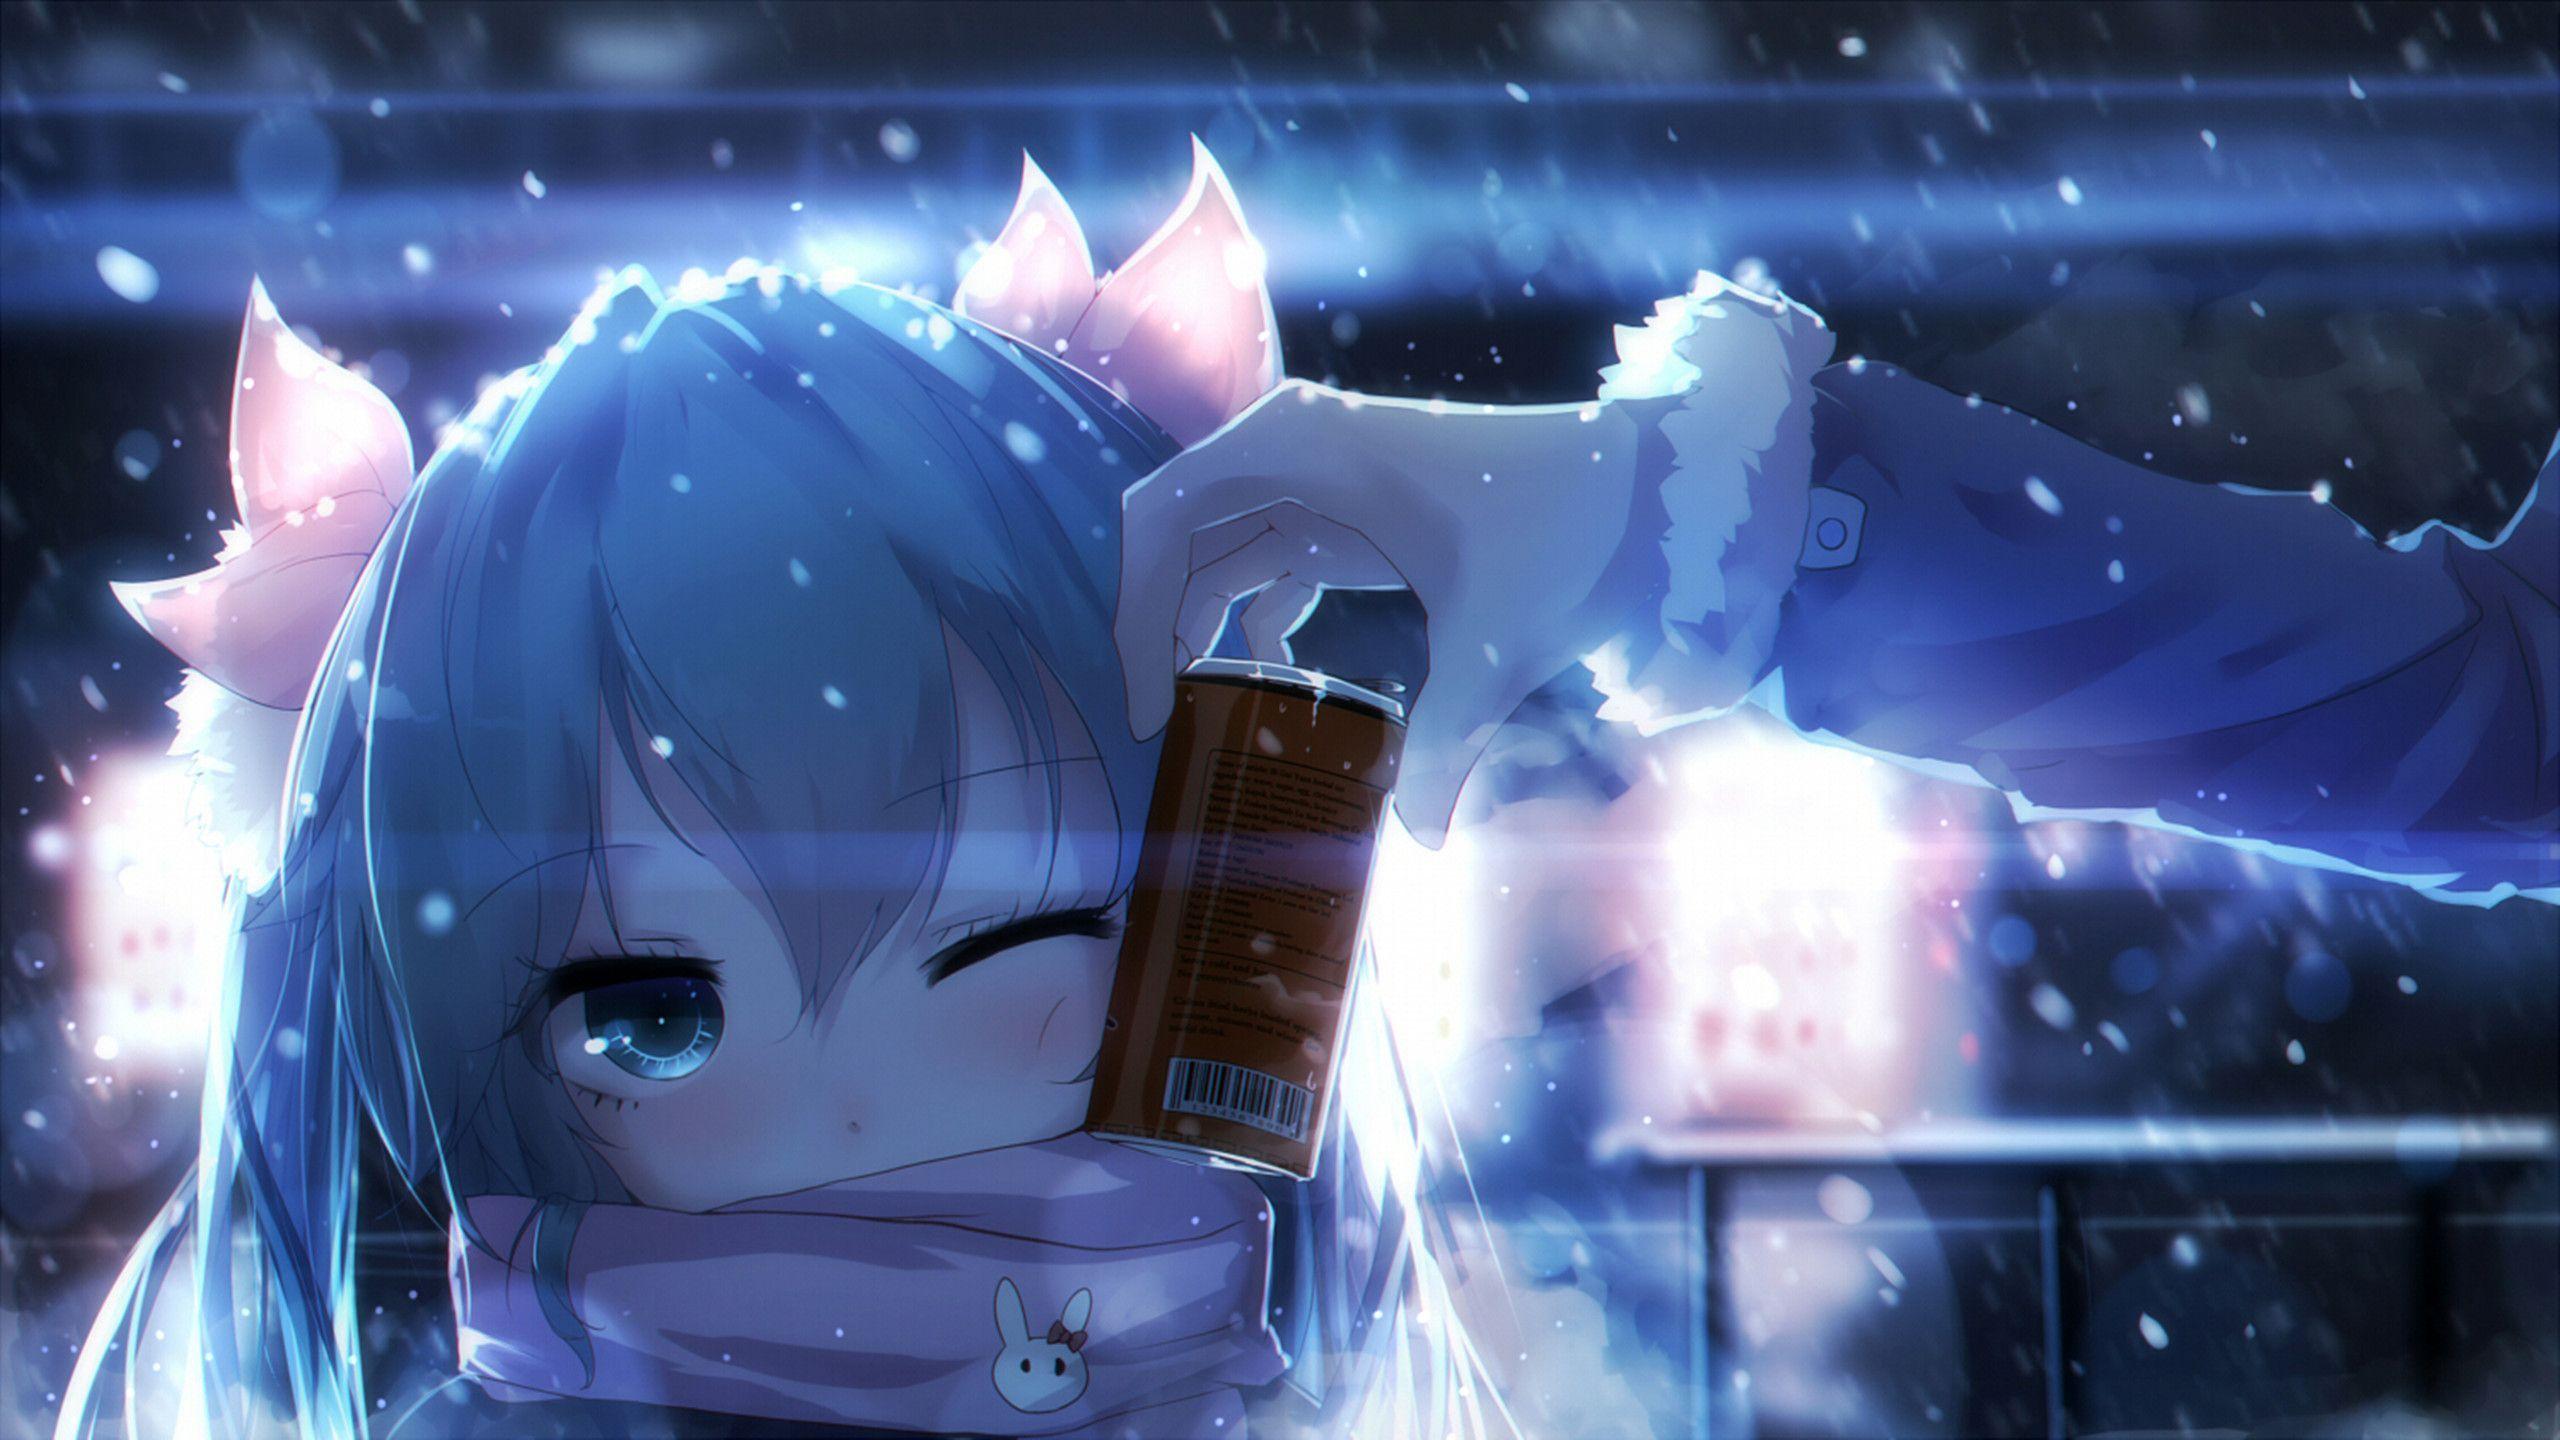 Cold Anime Girl Wallpaper Free Cold Anime Girl Background